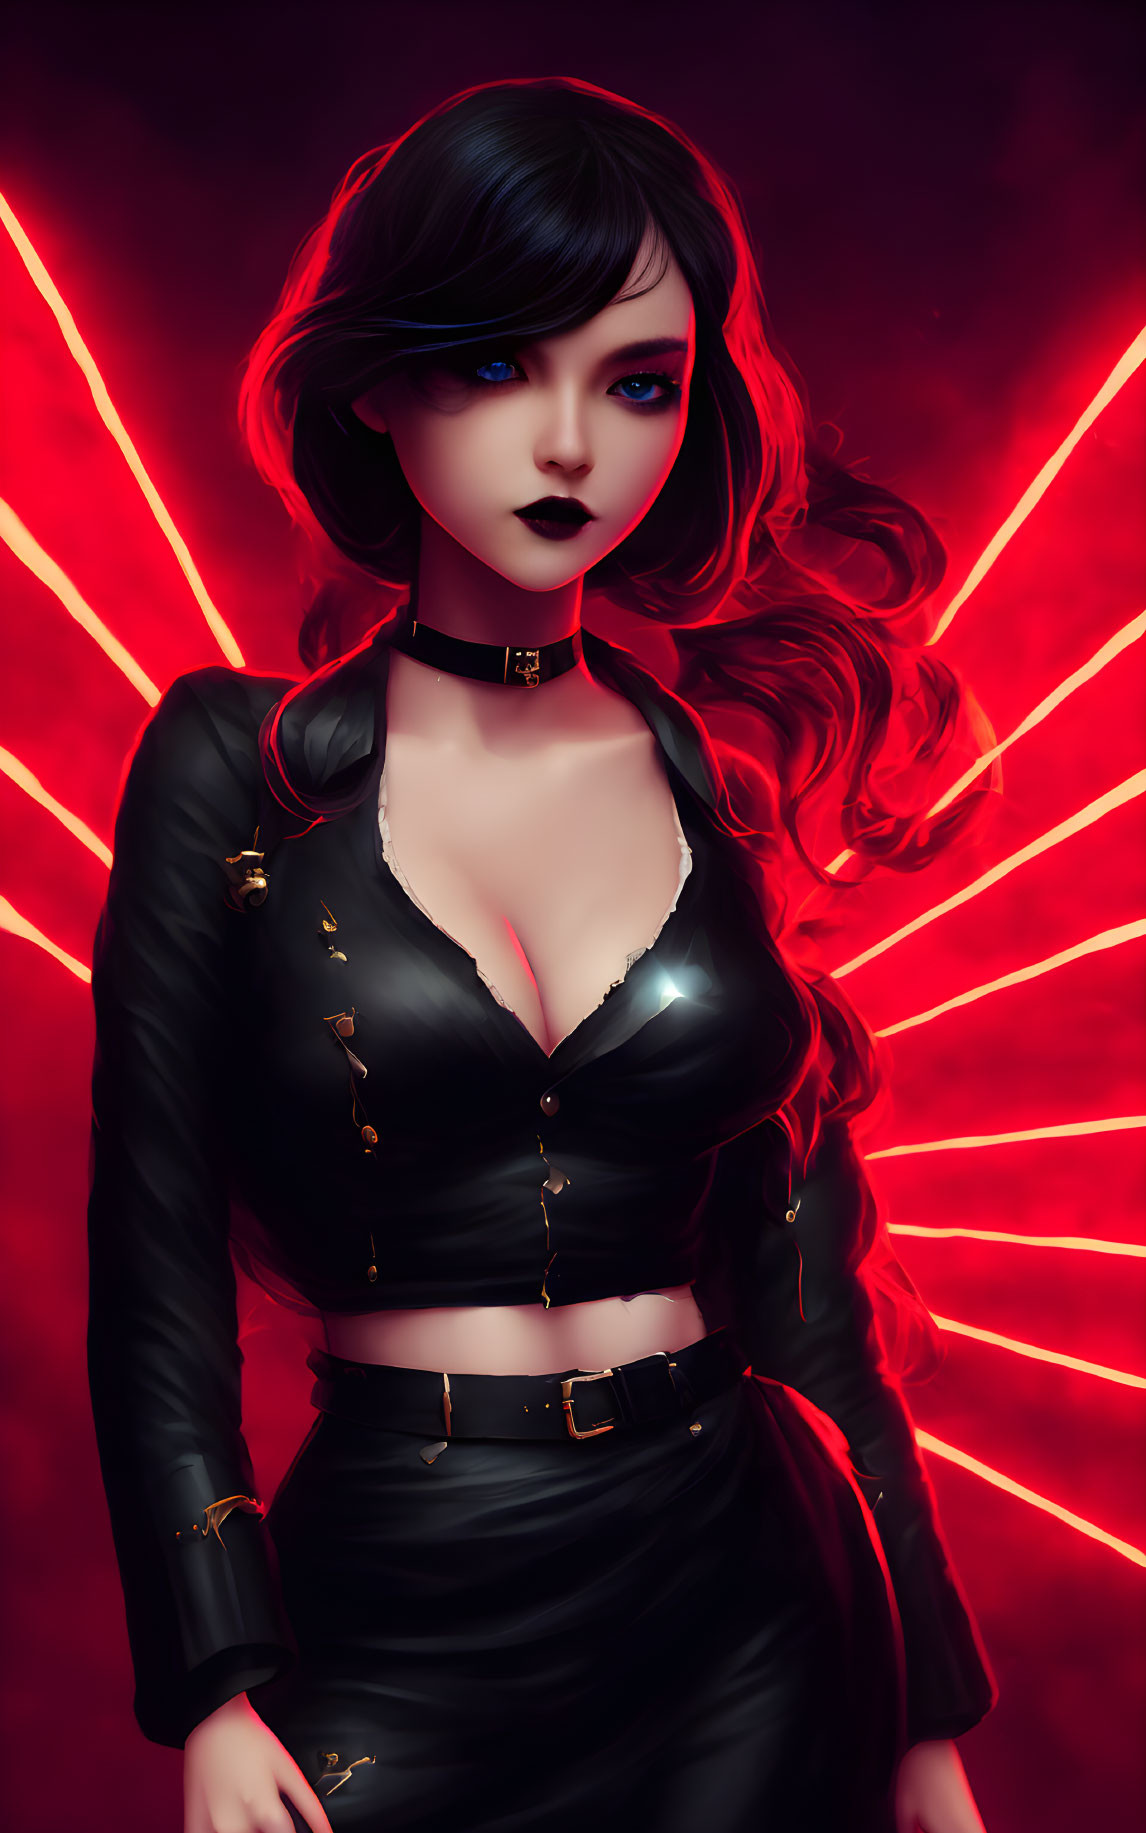 Digital illustration: Woman with red hair, pale skin, dark lips in black outfit on neon background